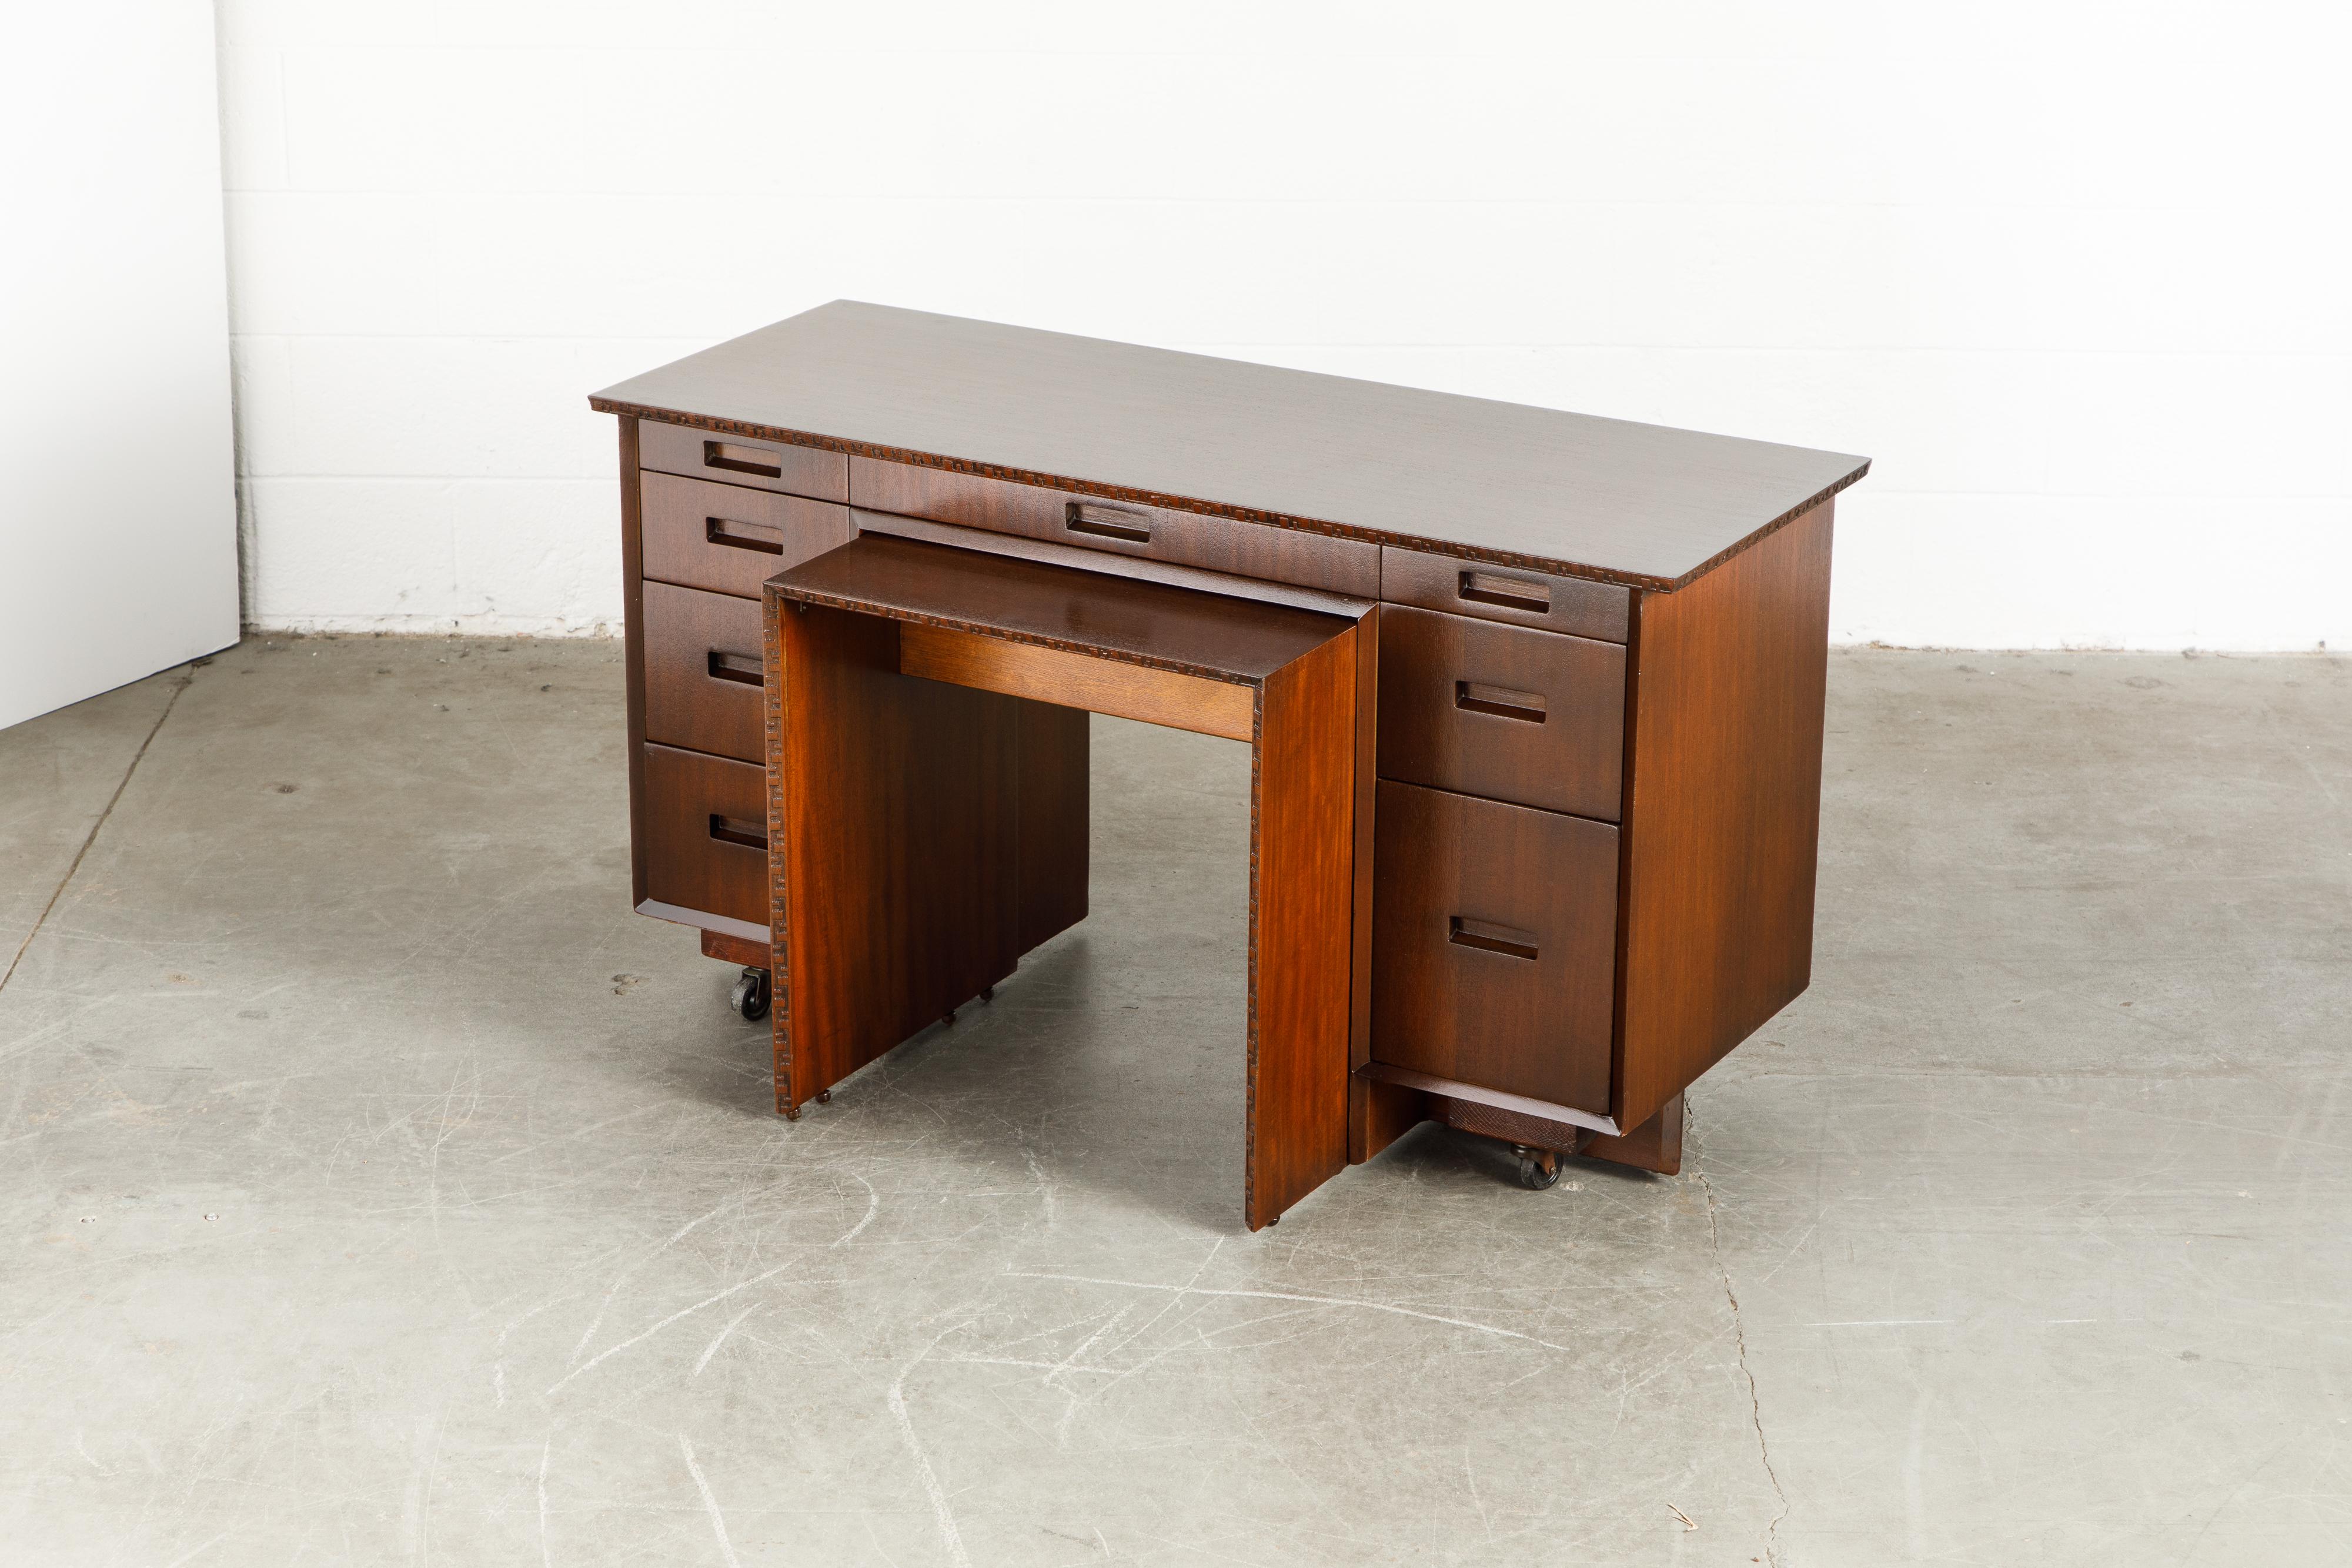 This gorgeously refinished Honduran Mahogany 'Taliesin' desk with pull-out table was designed by Frank Lloyd Wright for Heritage-Henredon in 1955 and produced only for two years, therefore is now a highly sought-after and rare collectors item. This